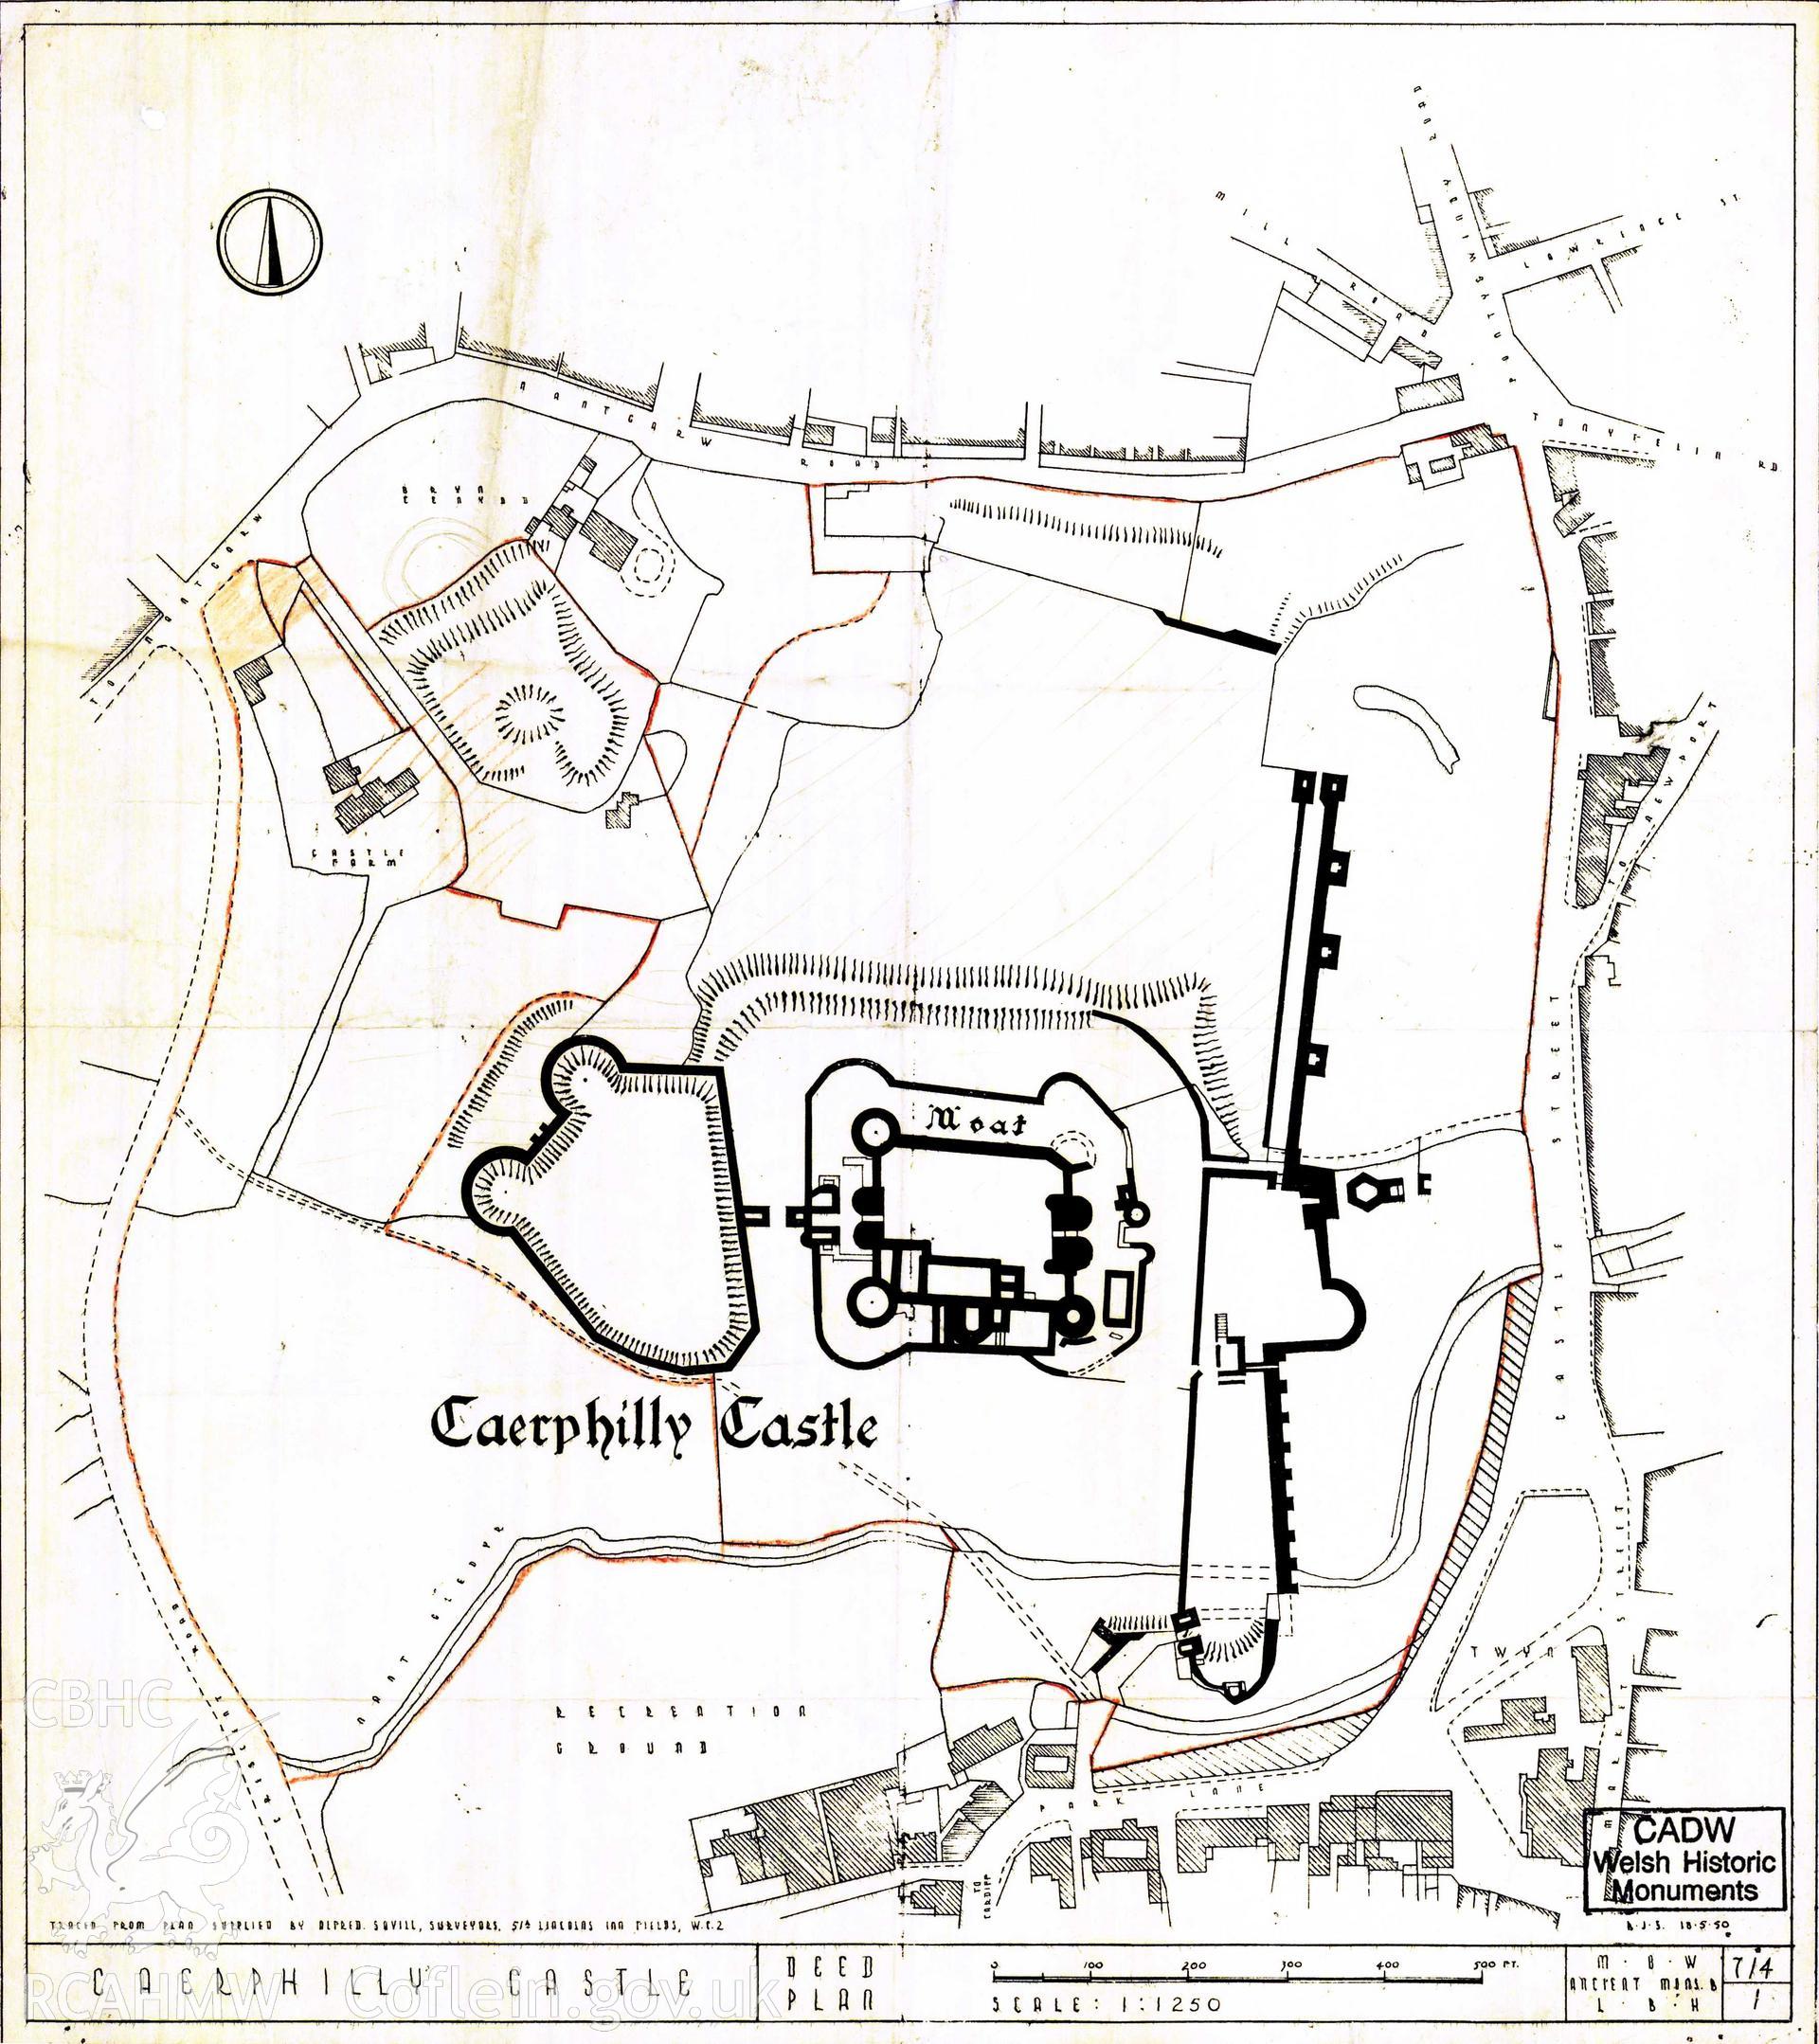 Cadw guardianship monument drawing of Caerphilly Castle. Deed Plan showing guardianship. Cadw ref. no: 714/1. Scale 1:1250.